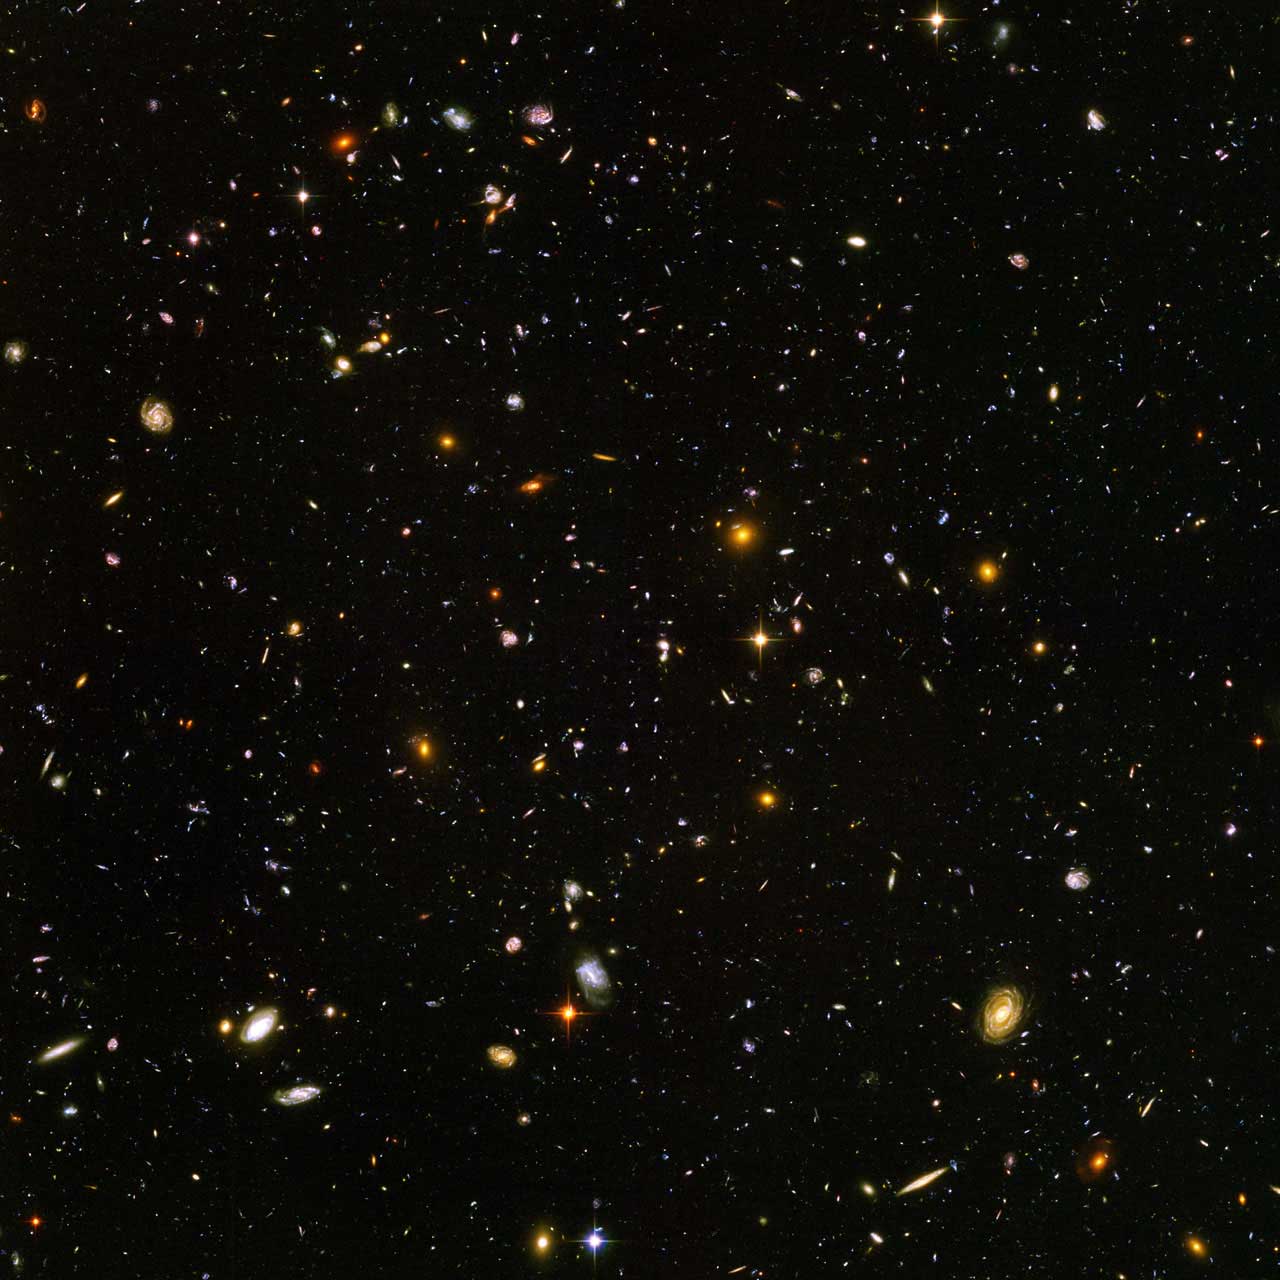 Hubble Captures Galaxies Galore, 2004; The amazing Hubble Space Telescope, through a deep core sampling technique, captured a view of nearly 10,000 galaxies.